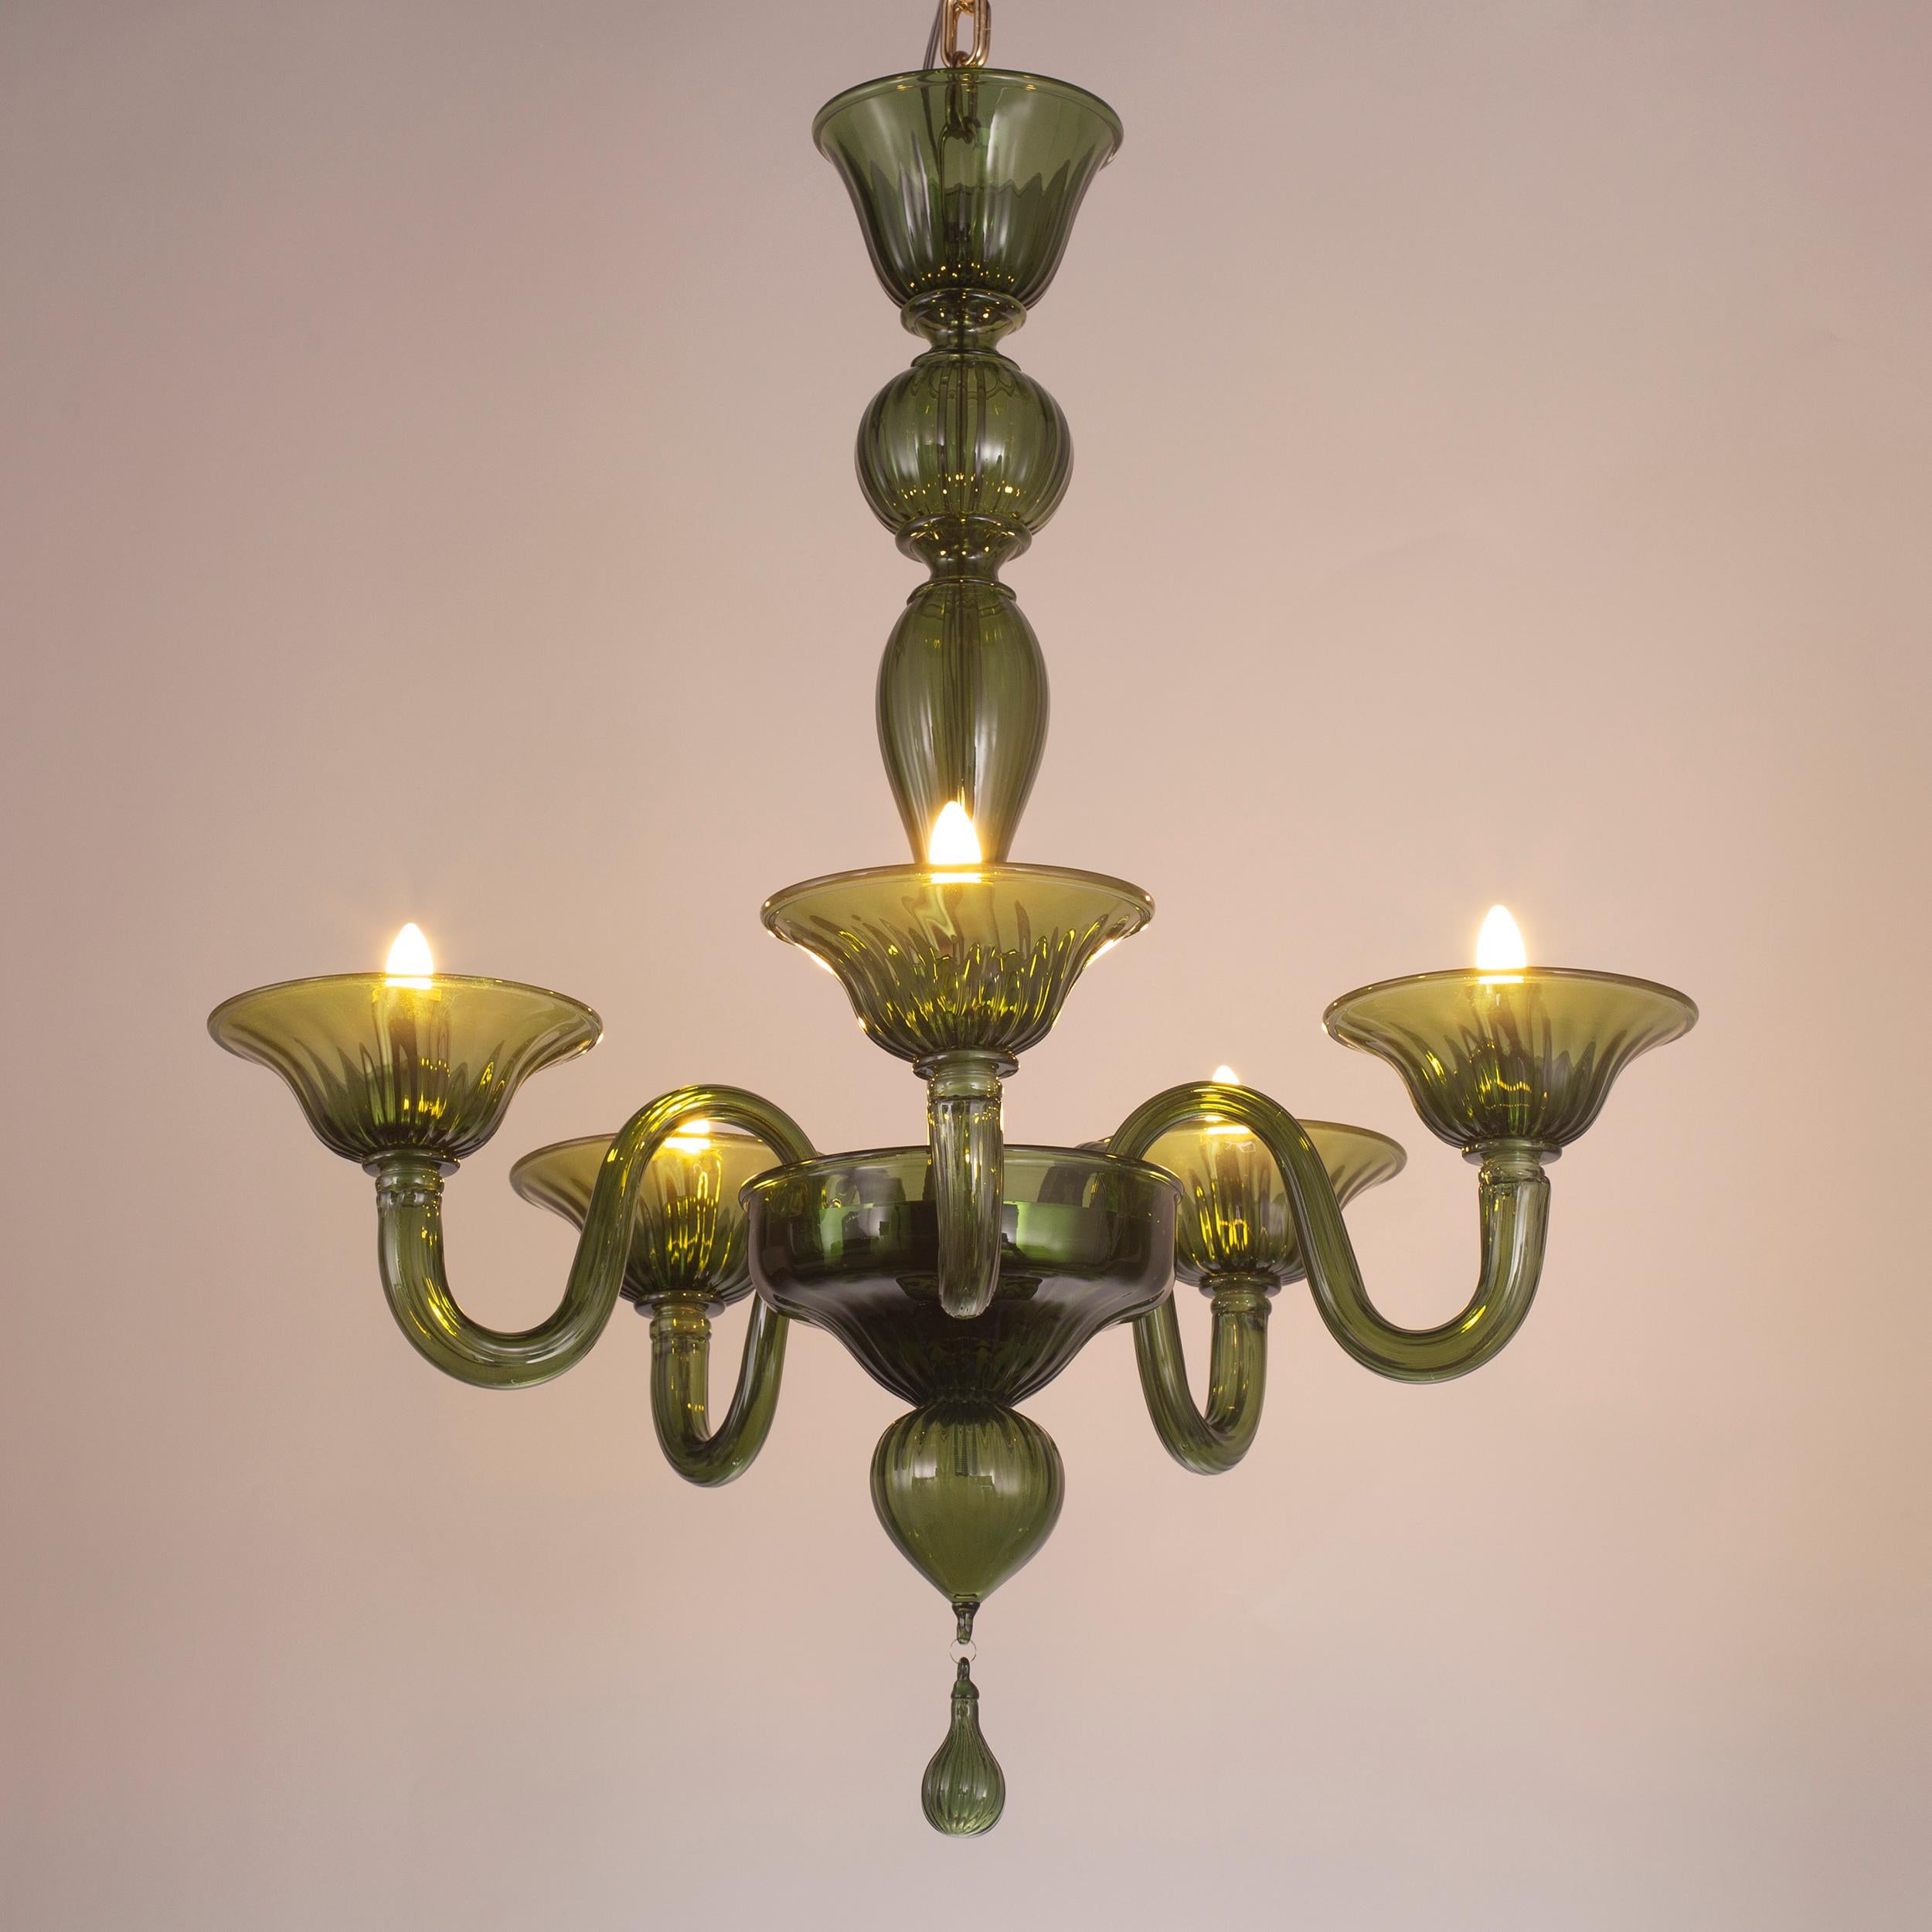 Classic chandelier, 5 arms olive green Murano glass Simplicissimus by Multiforme
This collection in Murano glass is characterized by superb simplicity. It is the result of a research which harks back to the Classic Murano chandeliers, with the